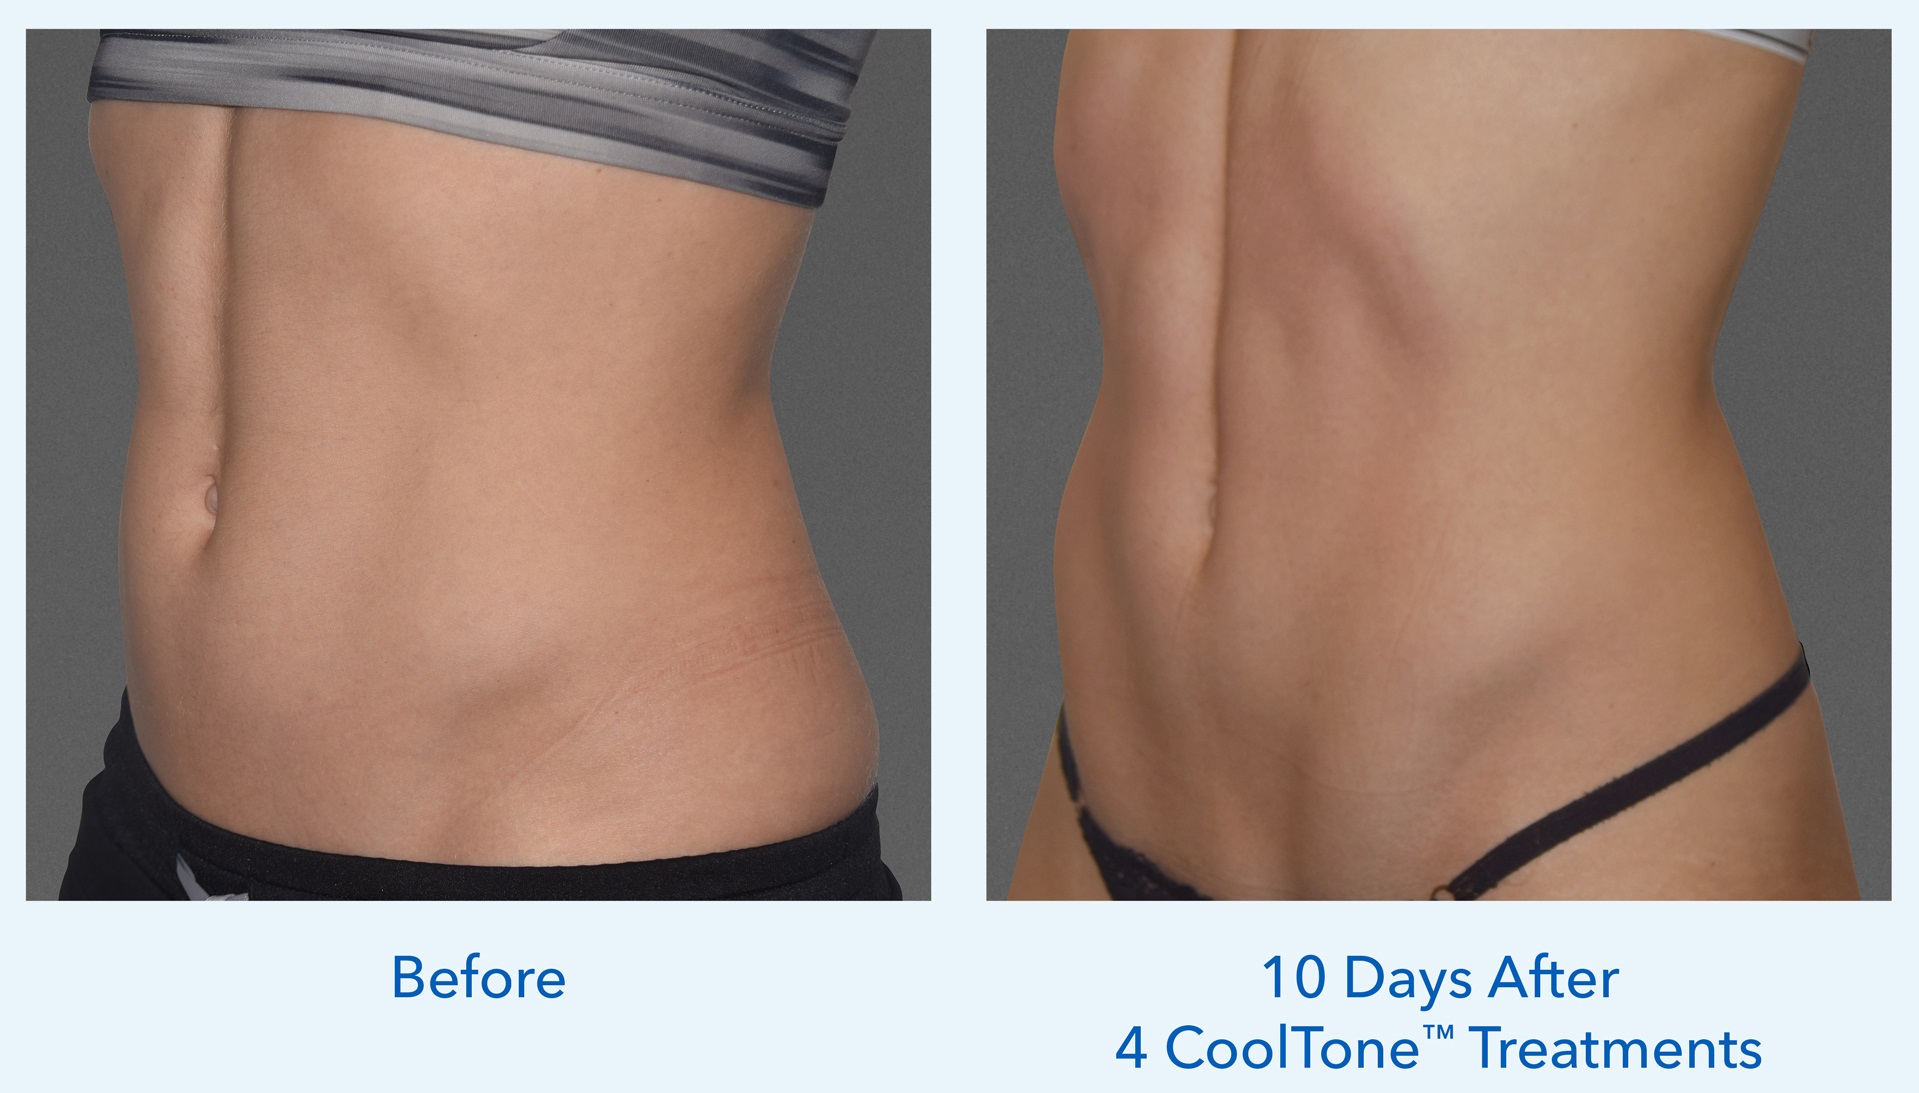 Before and After CoolTone™ Treatments